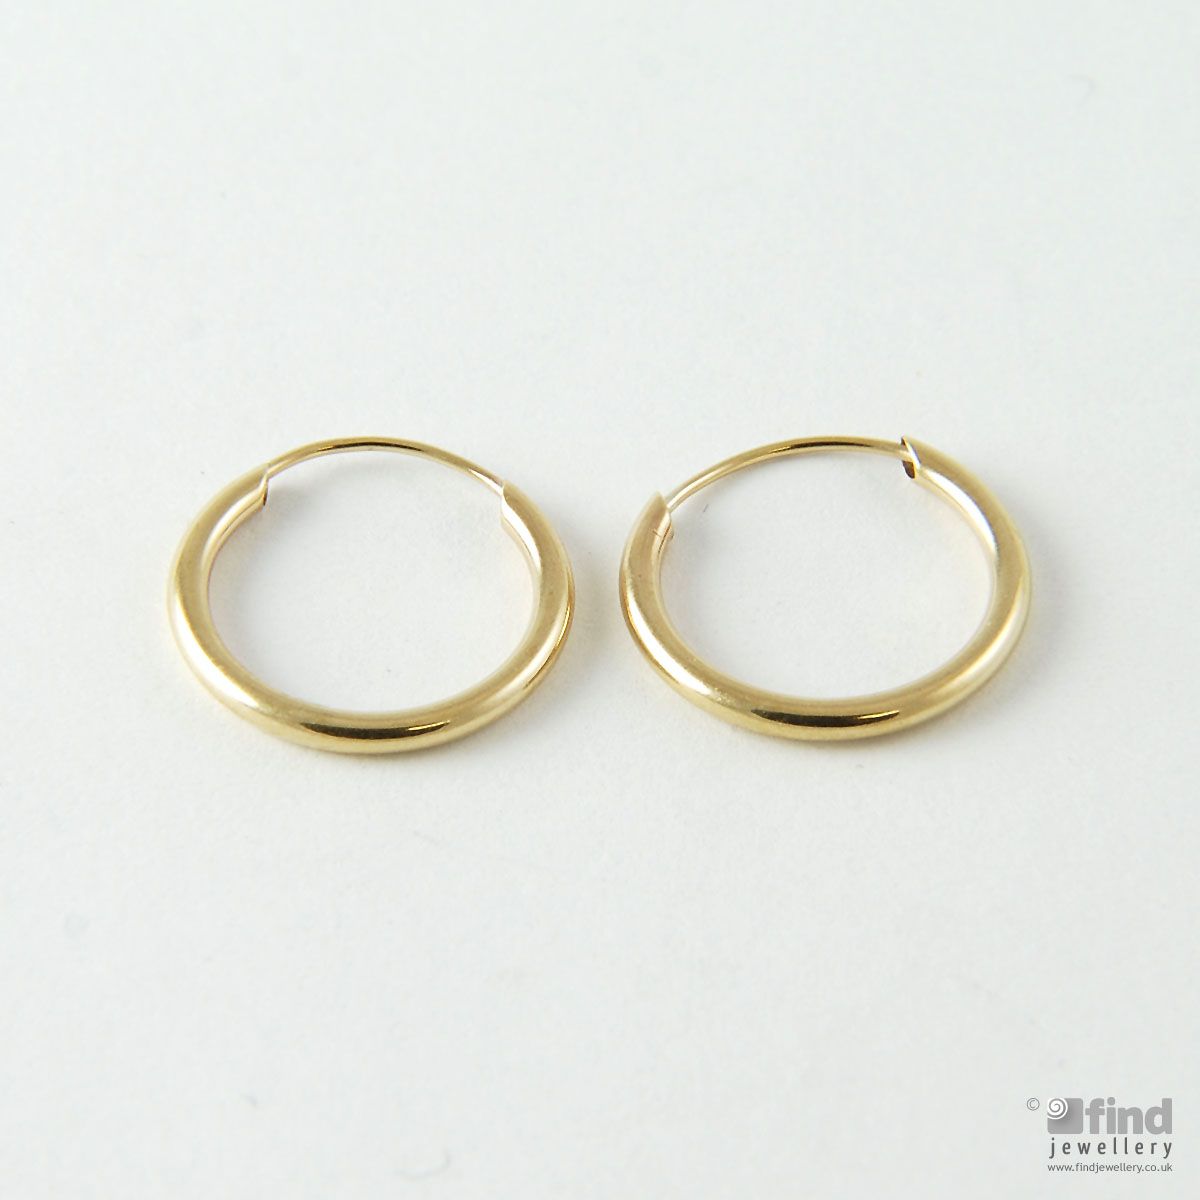 Unbranded 15mm 9ct Yellow Gold Sleepers